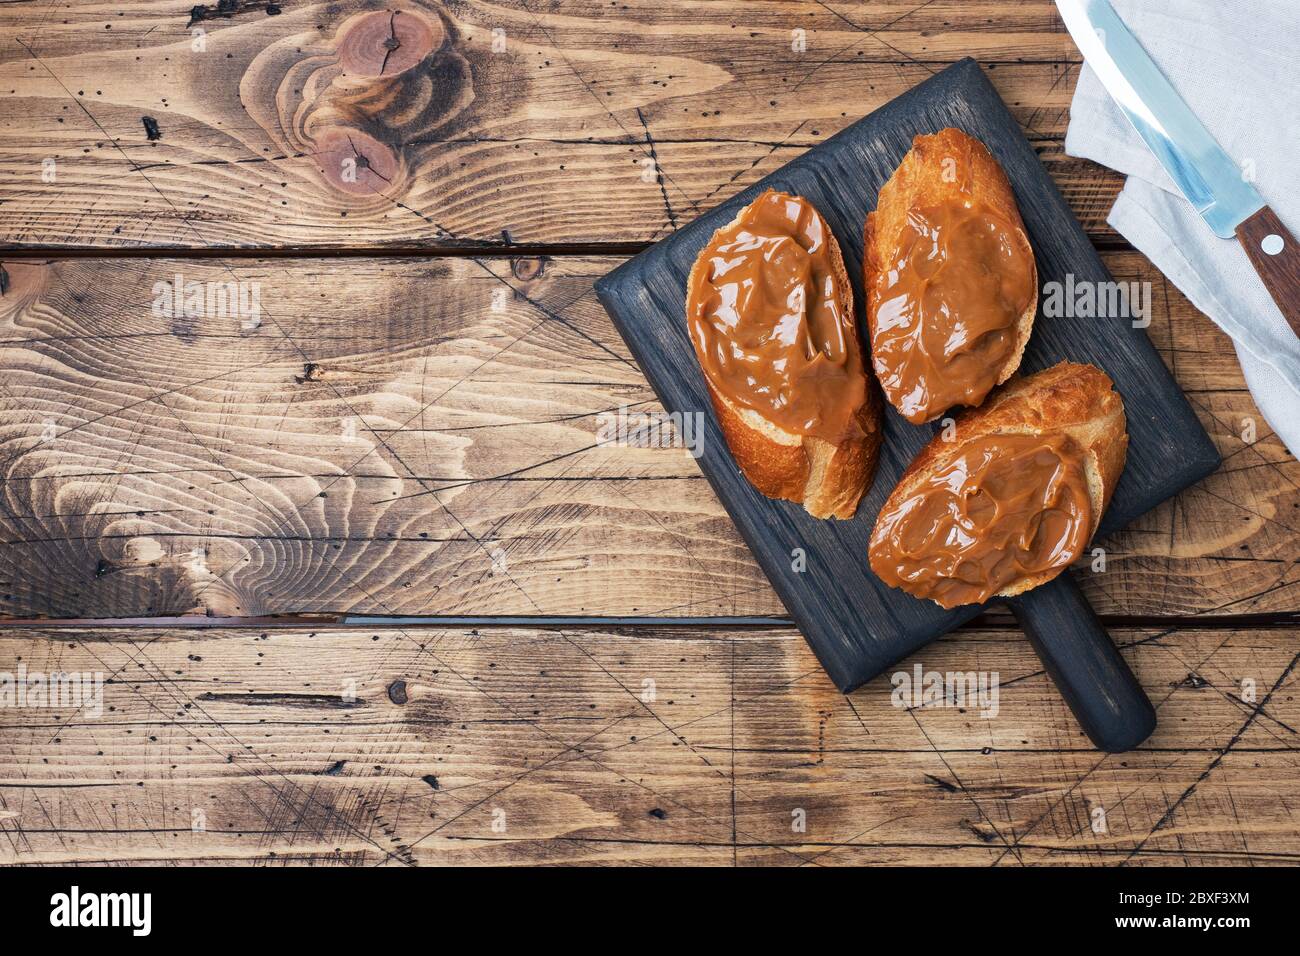 Sandwiches with baguette of bread spread with sweet paste of boiled condensed milk. Wooden background Copy space. Stock Photo